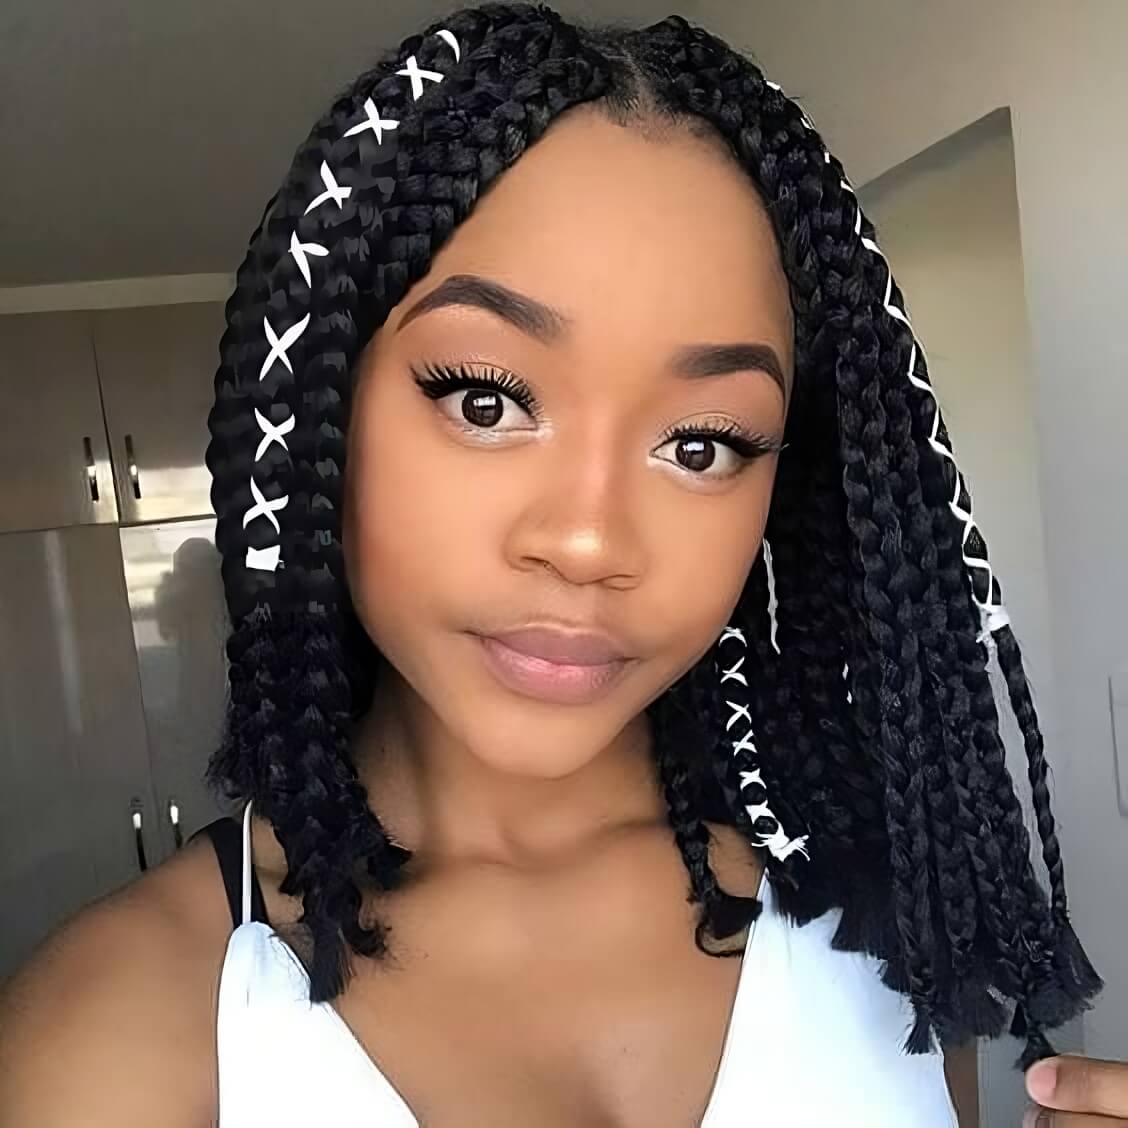 50 Trendy Braided Hairstyles To Instantly Glam Up Your Look - 325